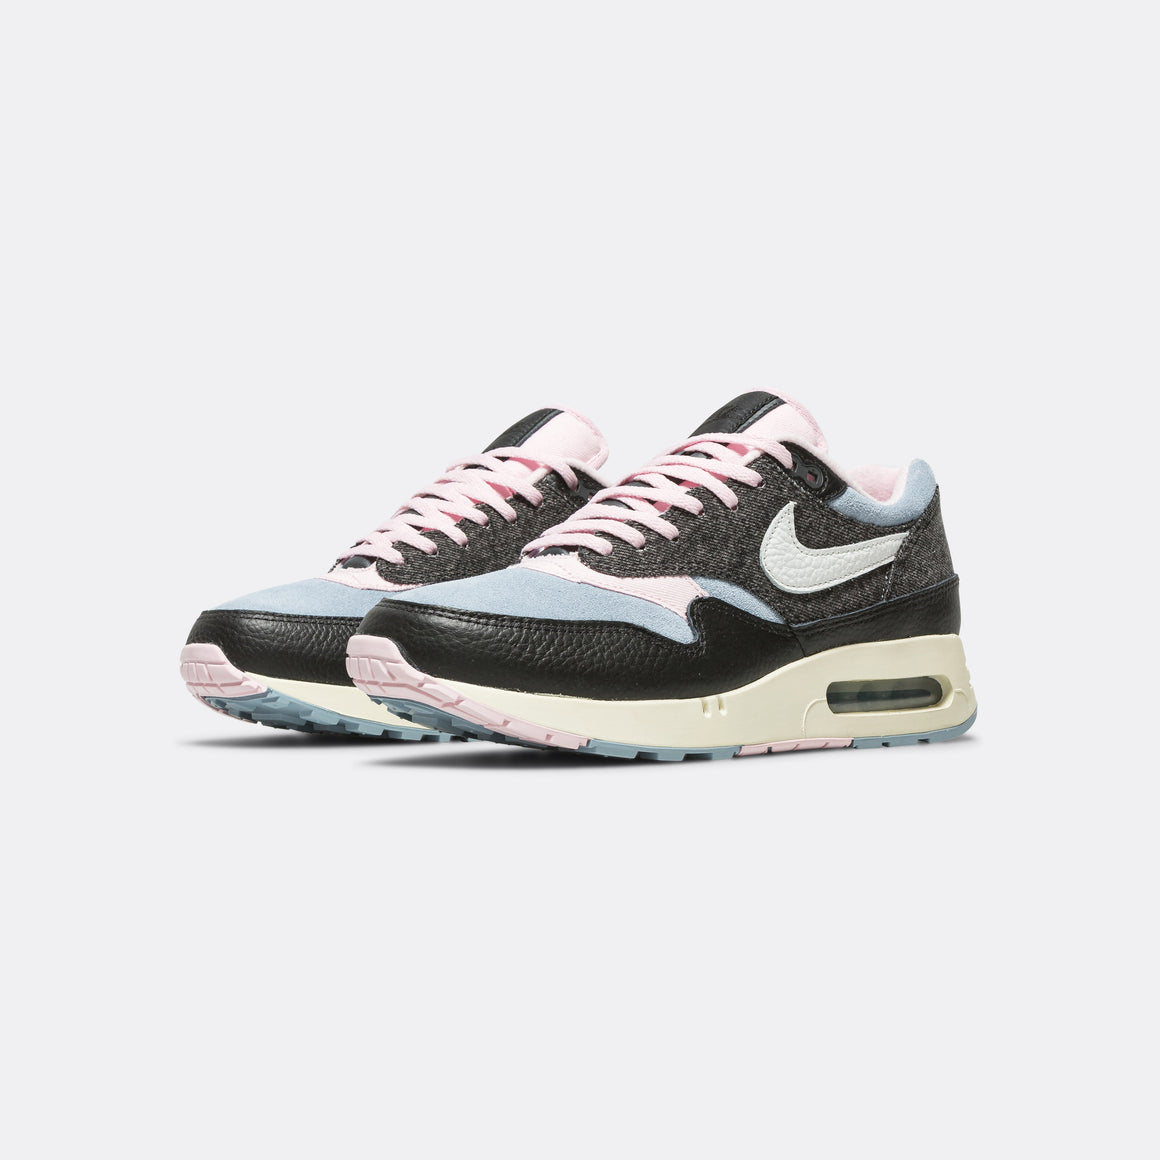 Nike - Air Max 1 '86 PRM - Black/Summit White-Anthracite-Pink Foam - UP THERE